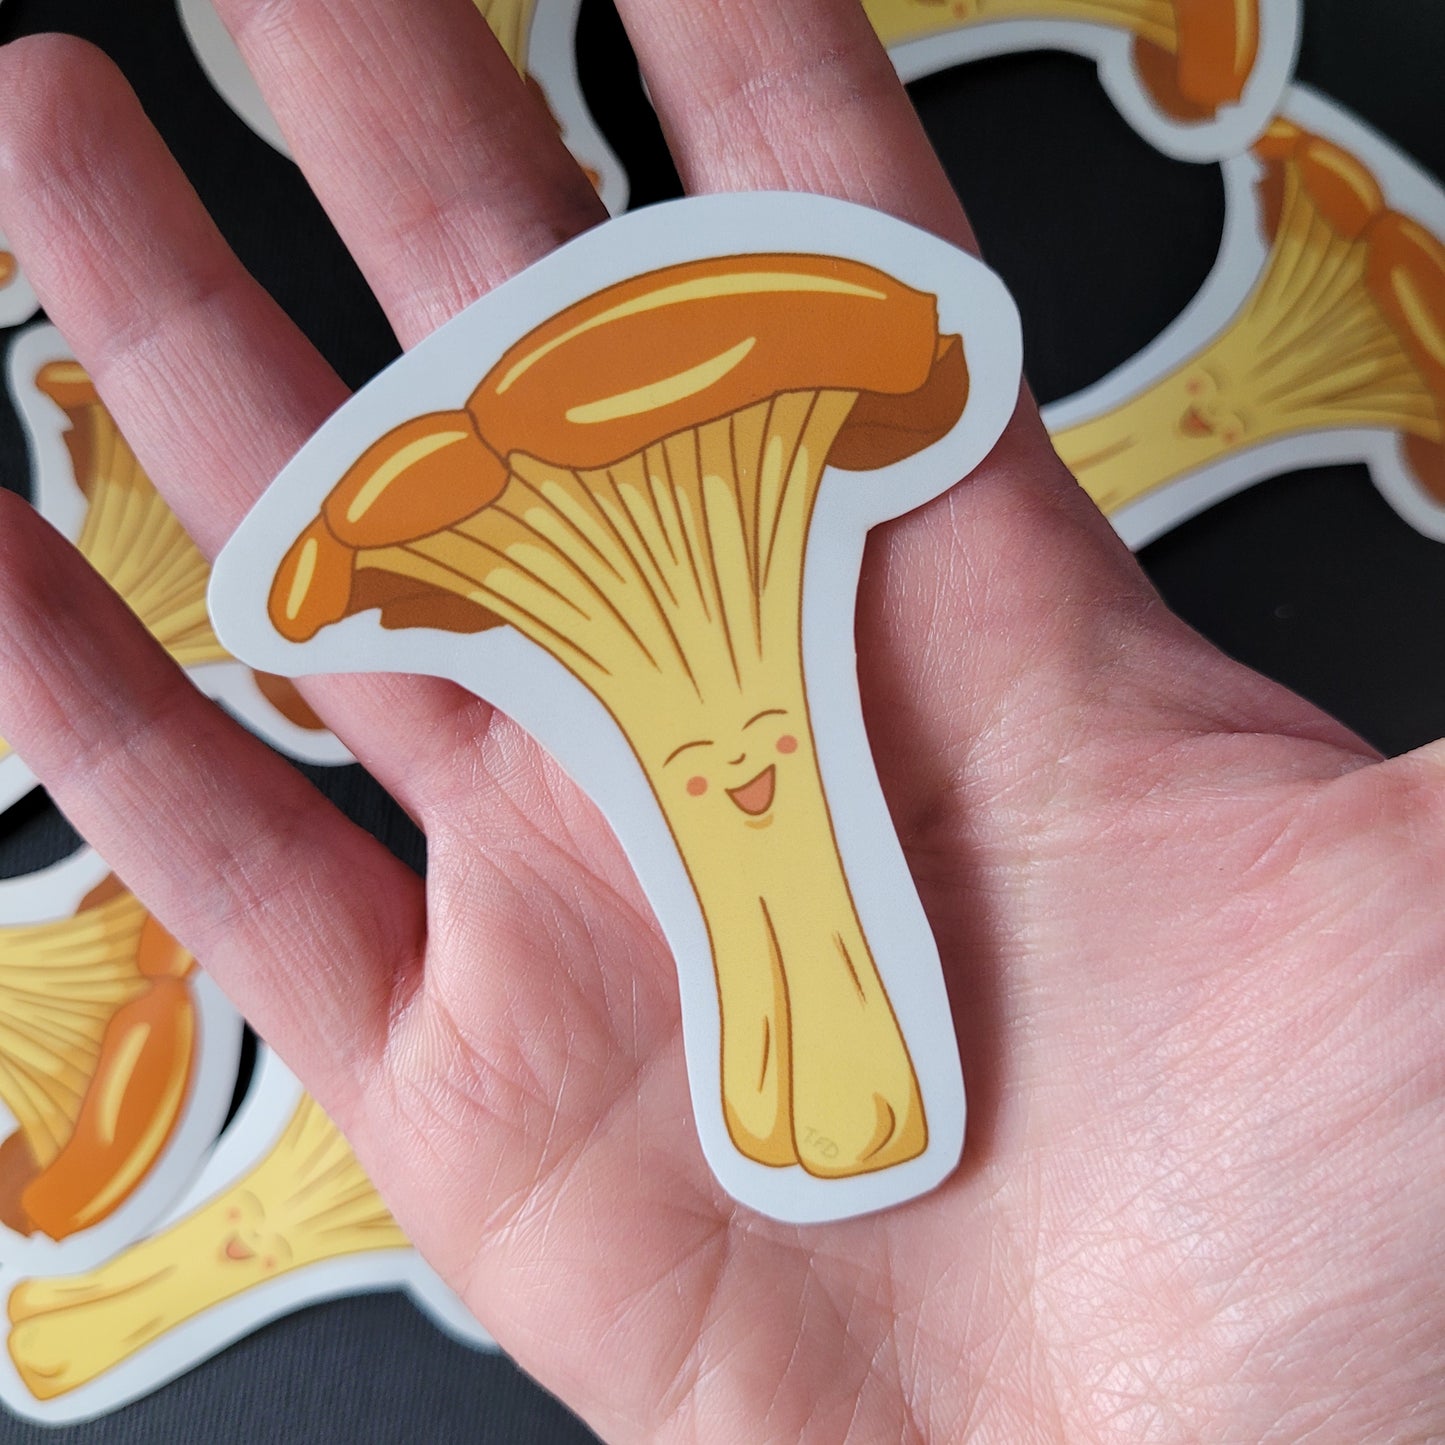 chanterelle mushroom sticker held in palm of hand for size